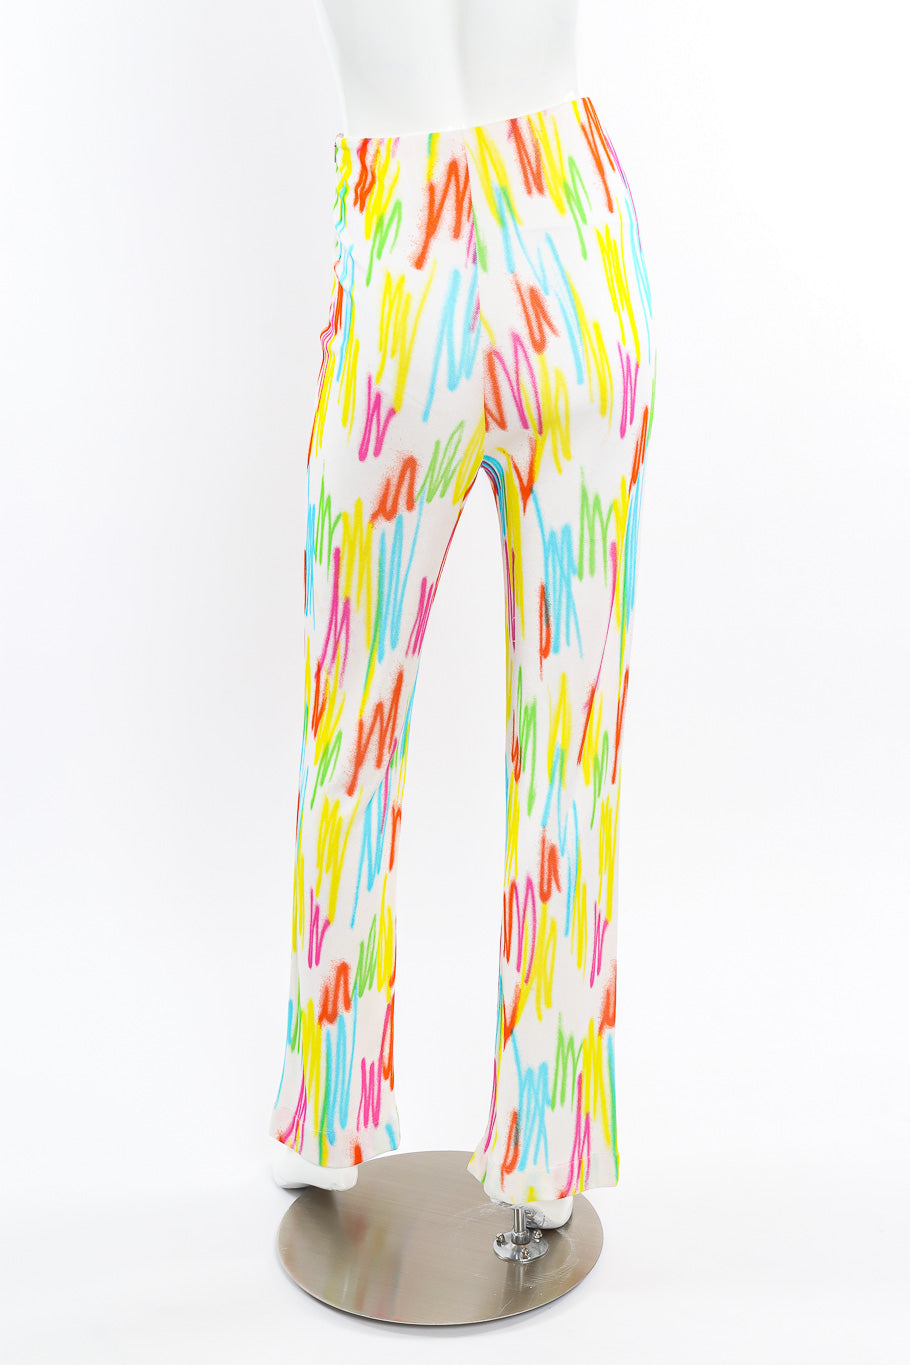 Vintage Gianni Versace 1996 SS Neon Scribble Top and Pant Set back view of pant on mannequin @Recessla